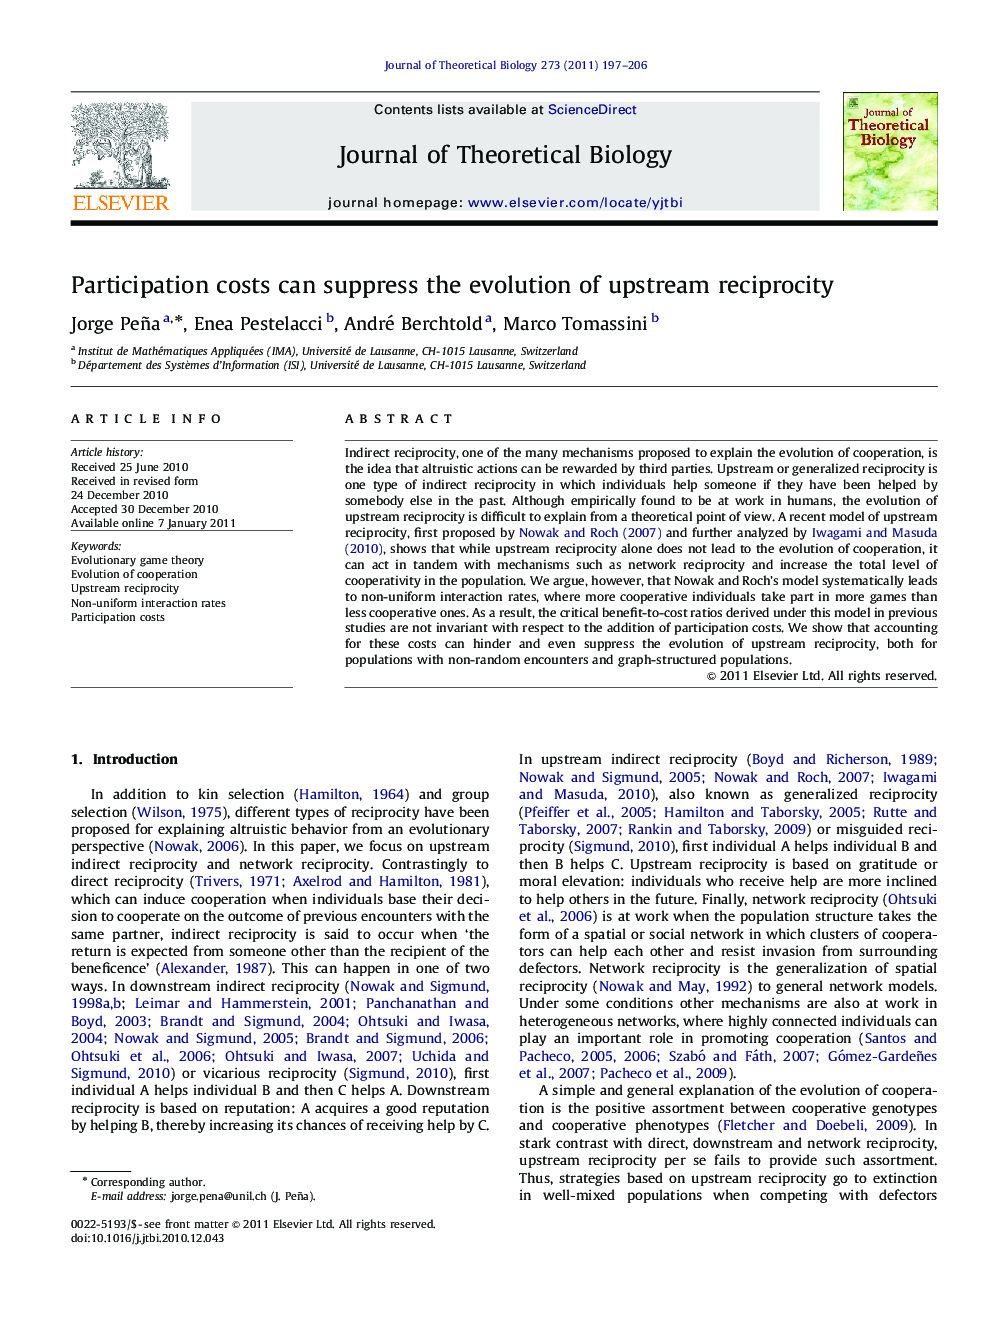 Participation costs can suppress the evolution of upstream reciprocity